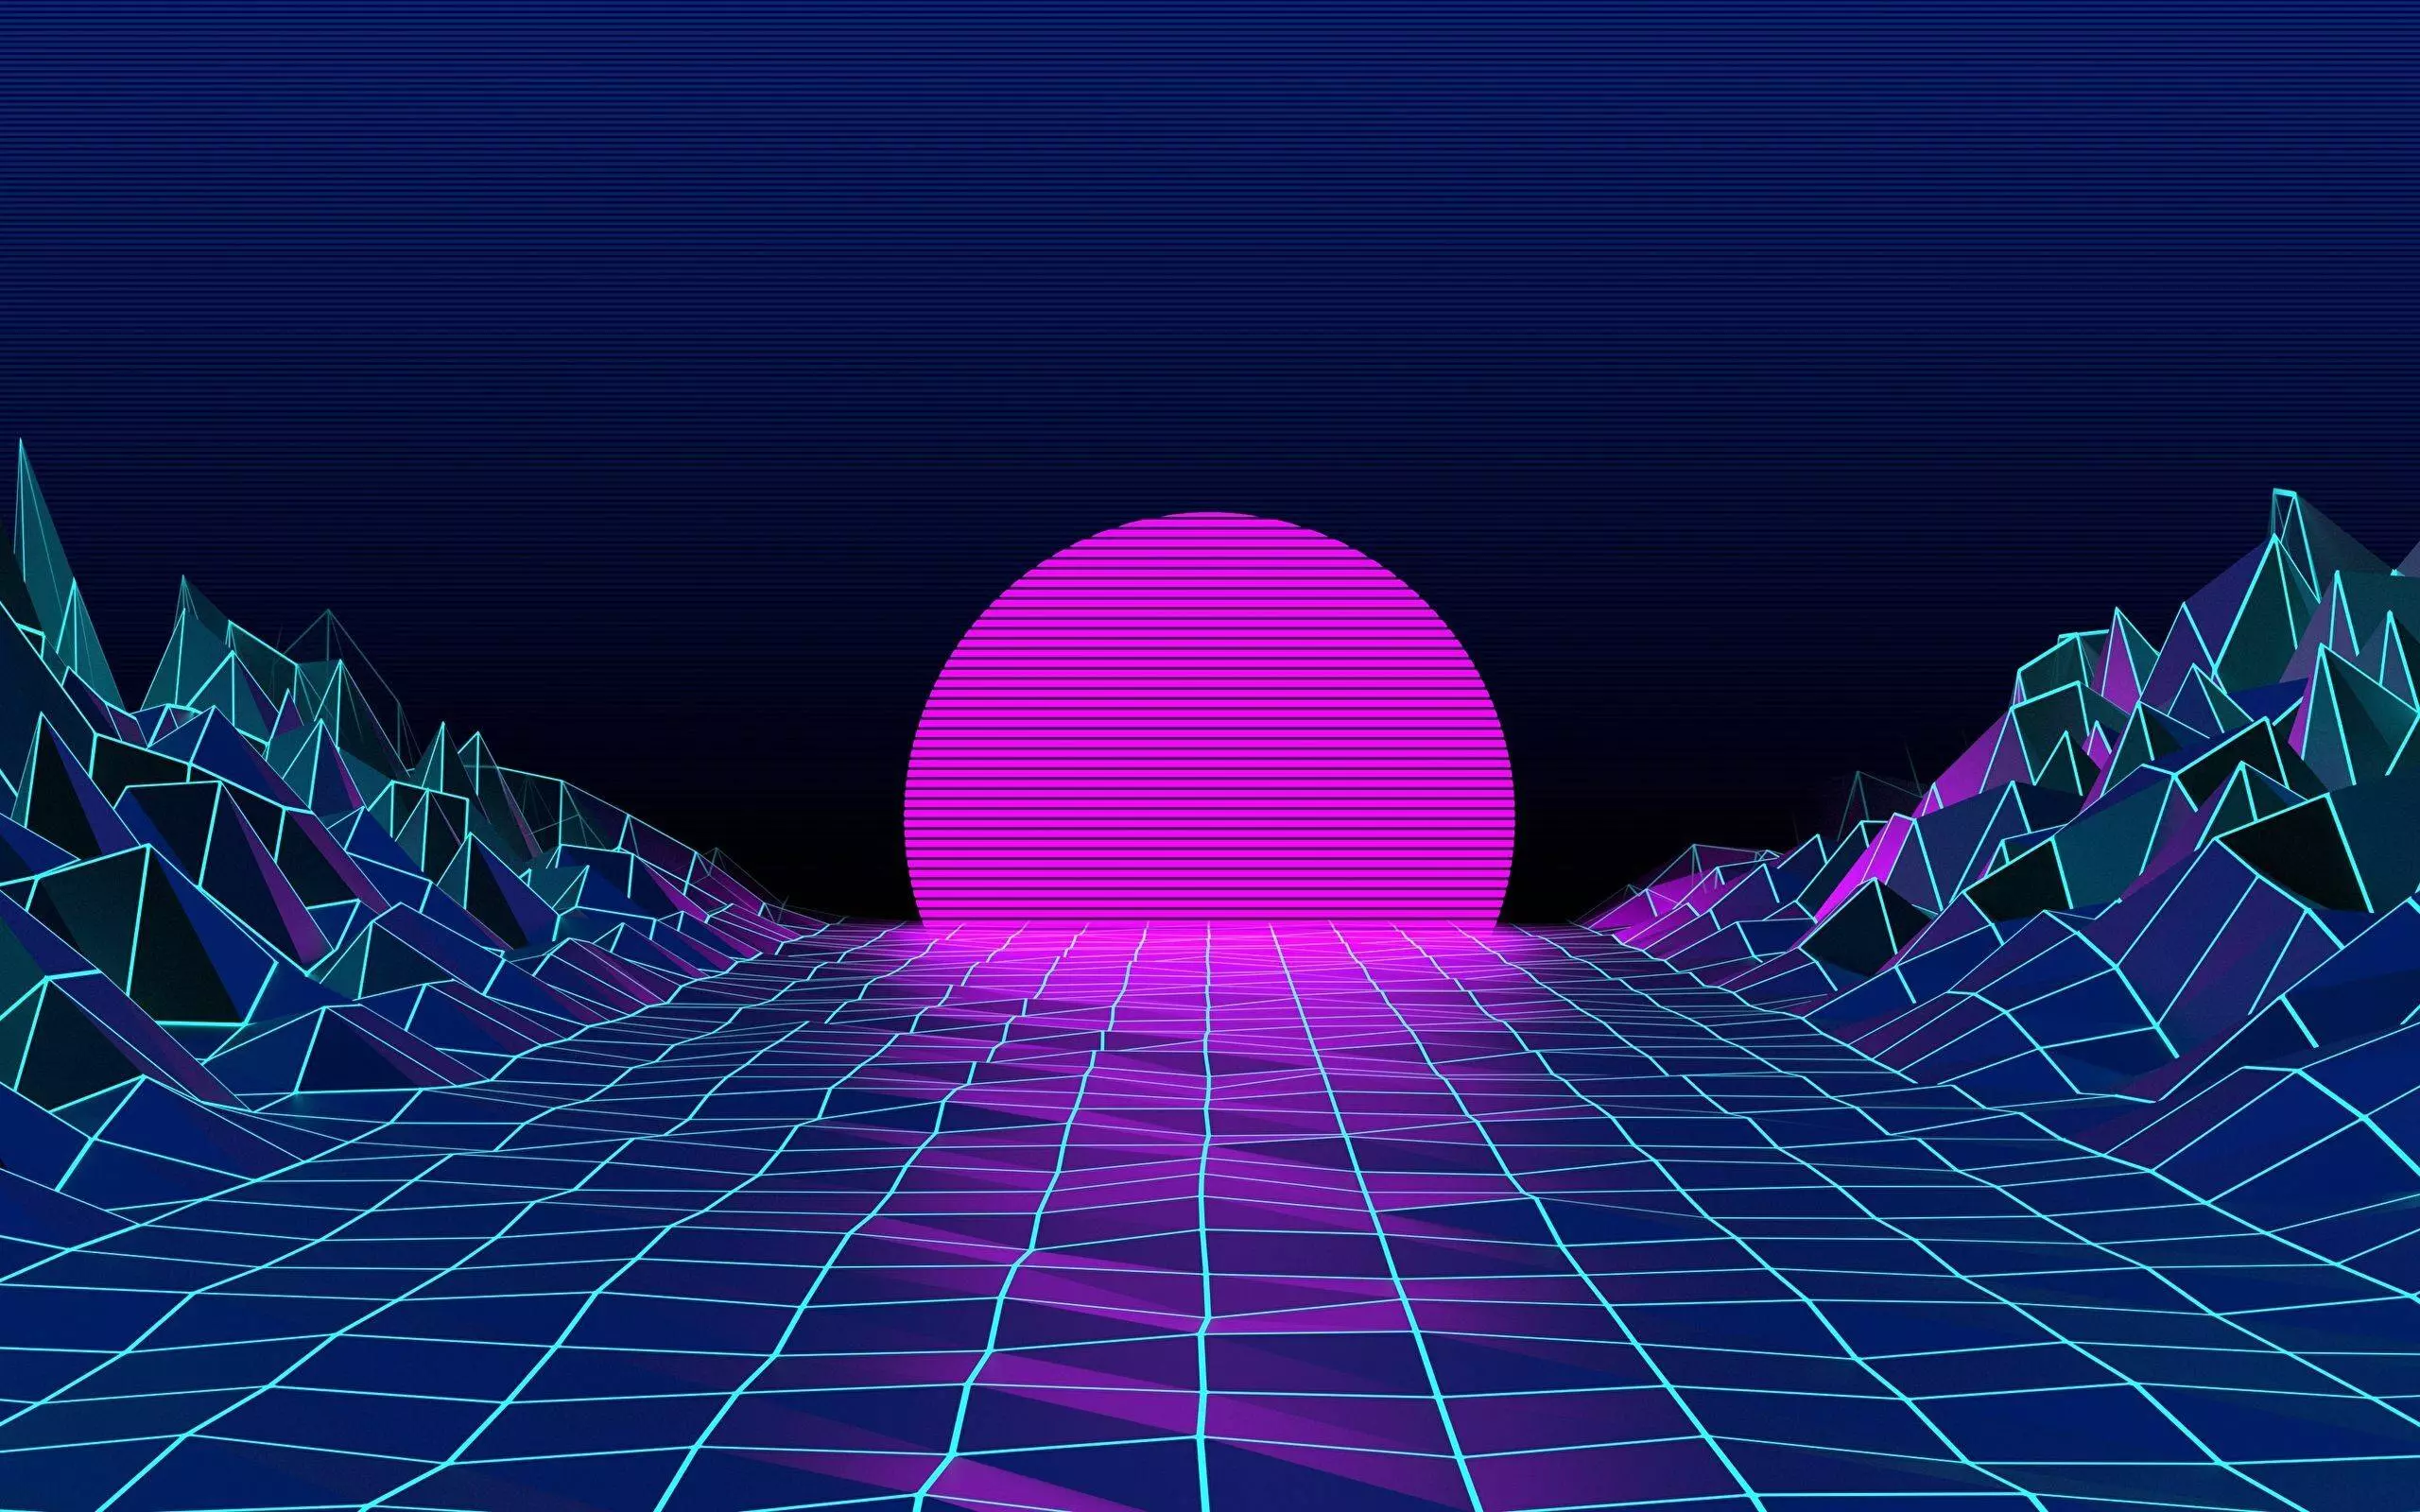 A synthwave wallpaper of a neon purple and blue sunset over a mountain range - Cyan